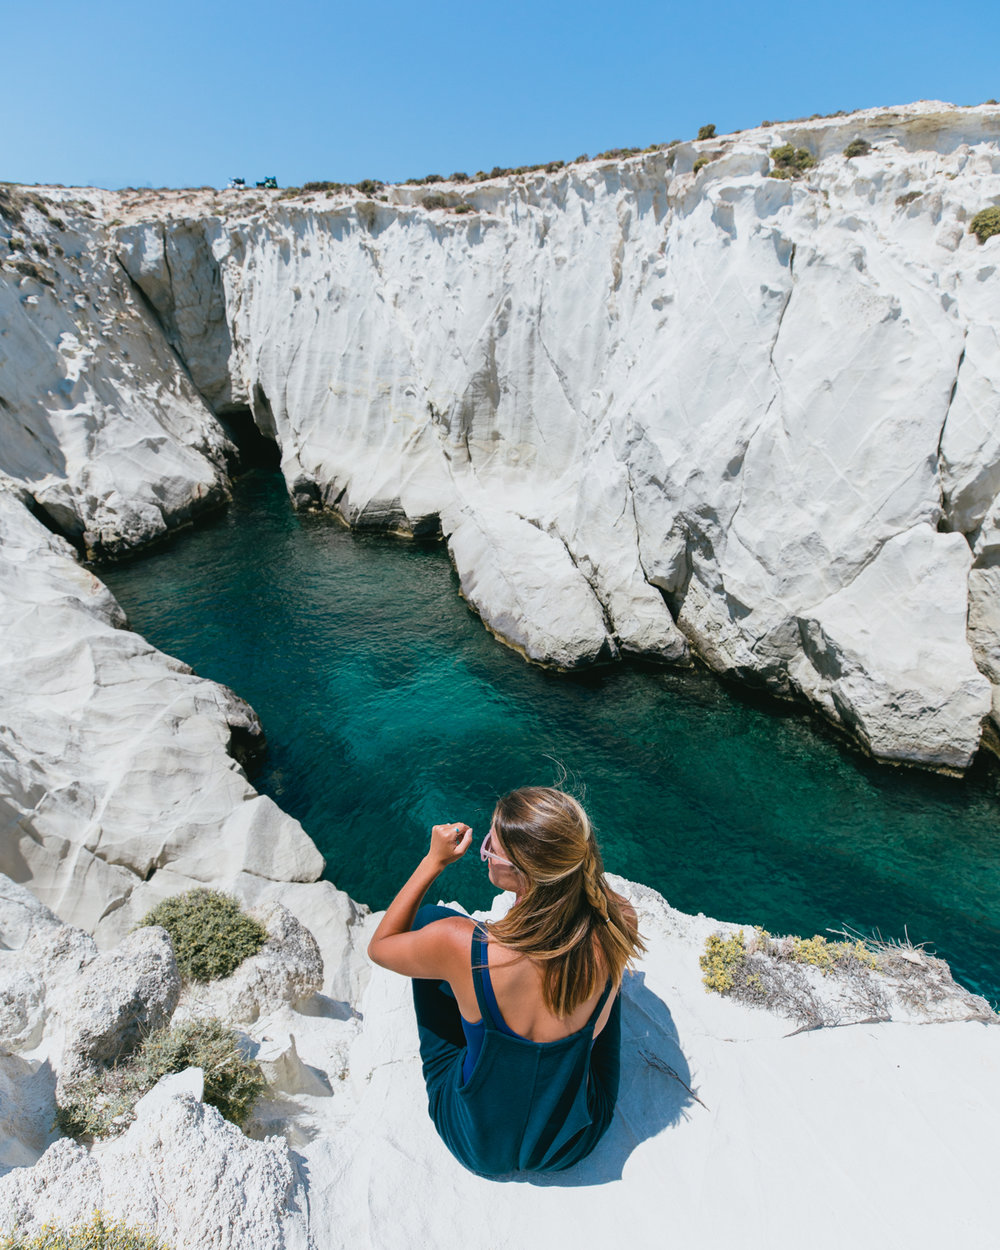 what to do in milos greece